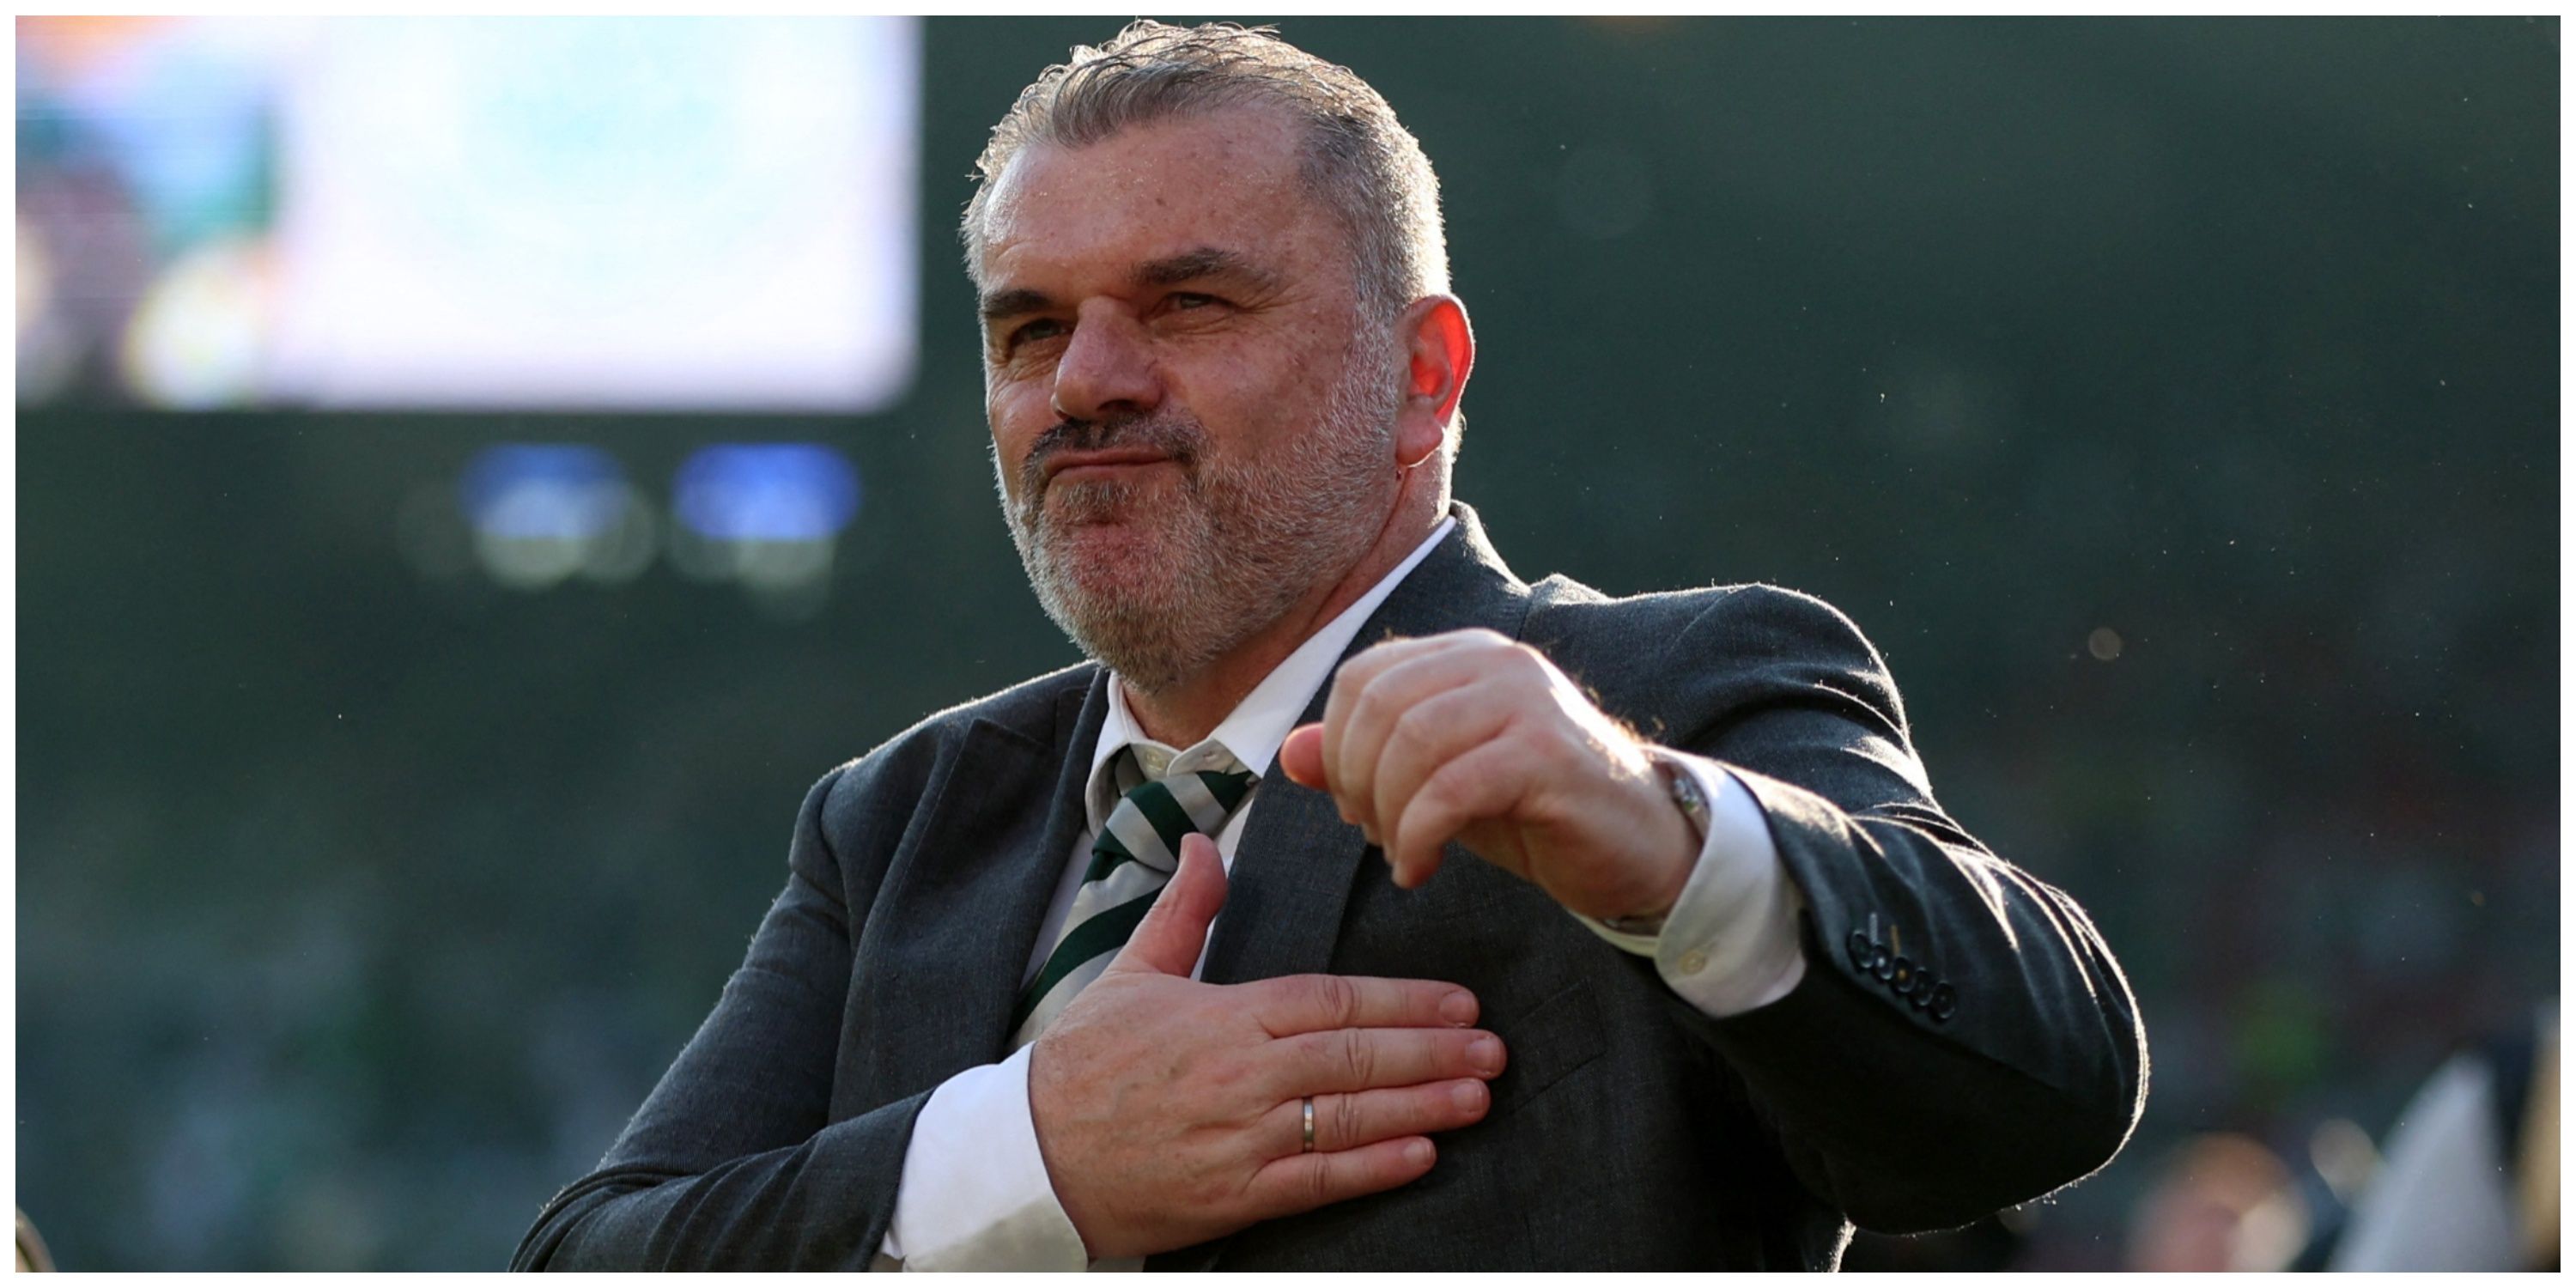 Ange Postecoglou with hand on chest